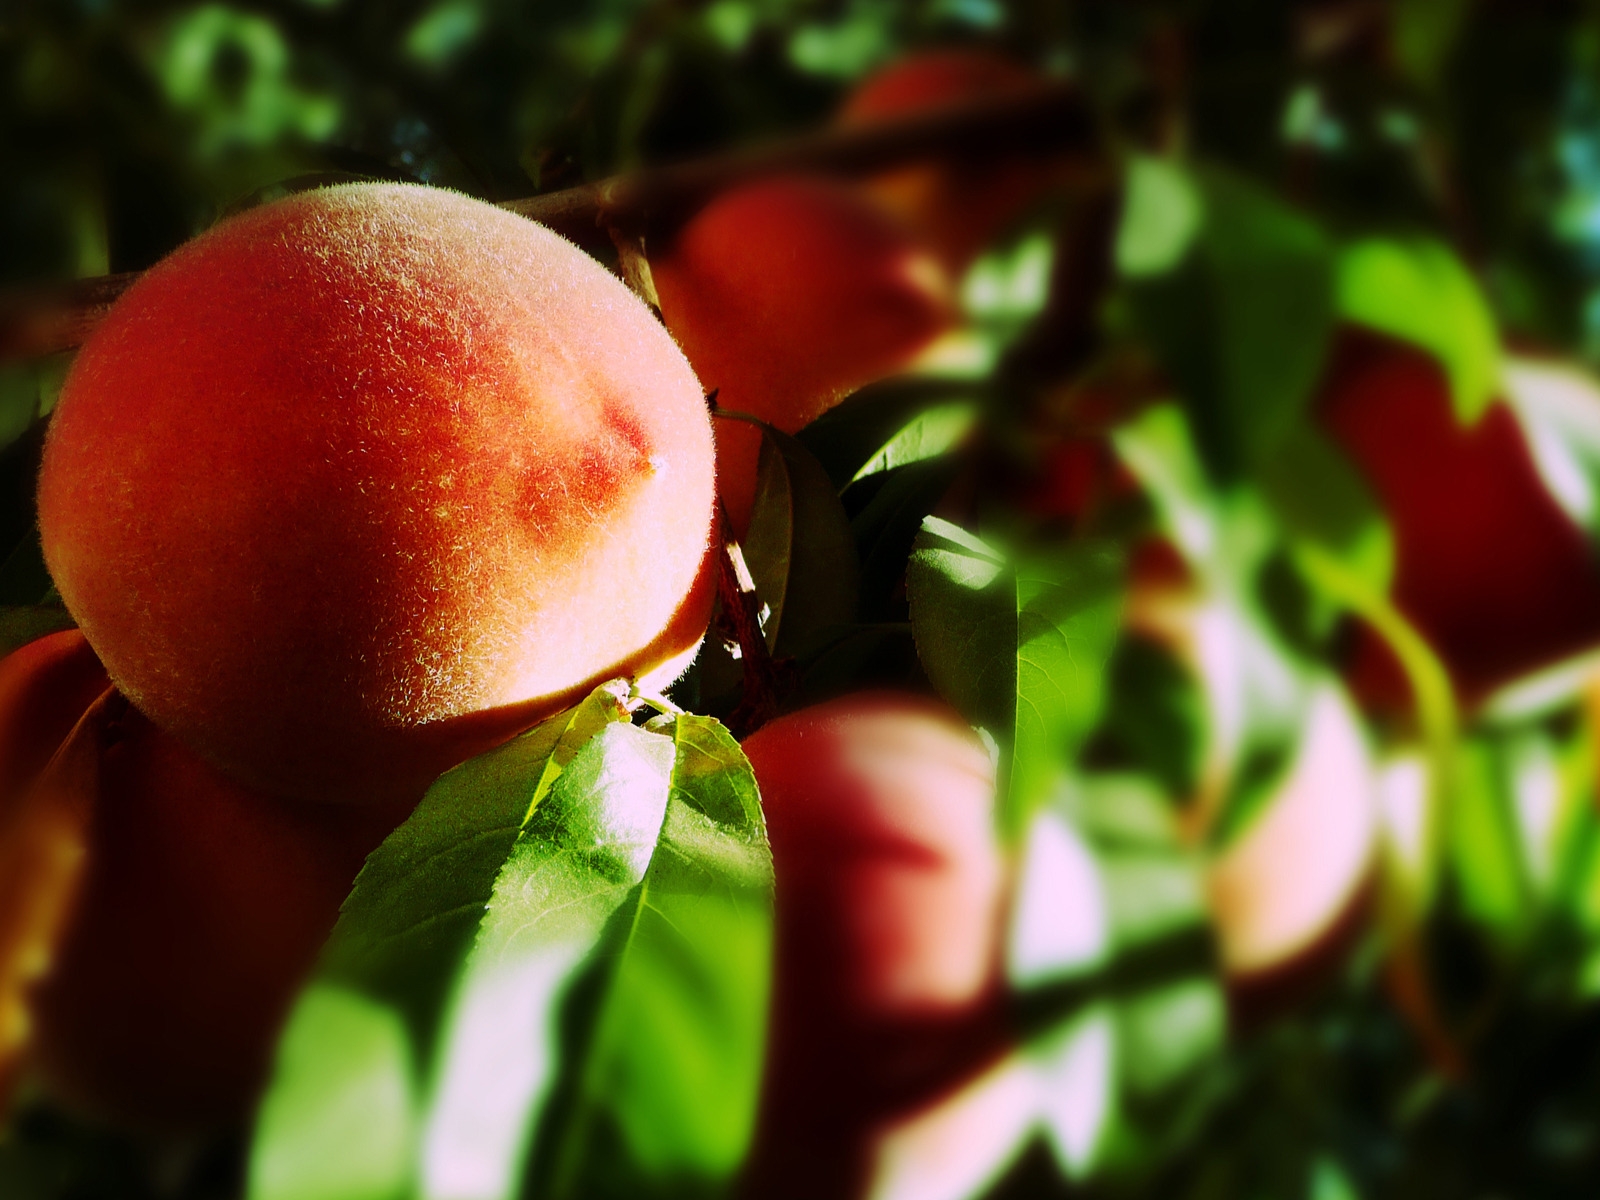 Blurry Peaches for 1600 x 1200 resolution